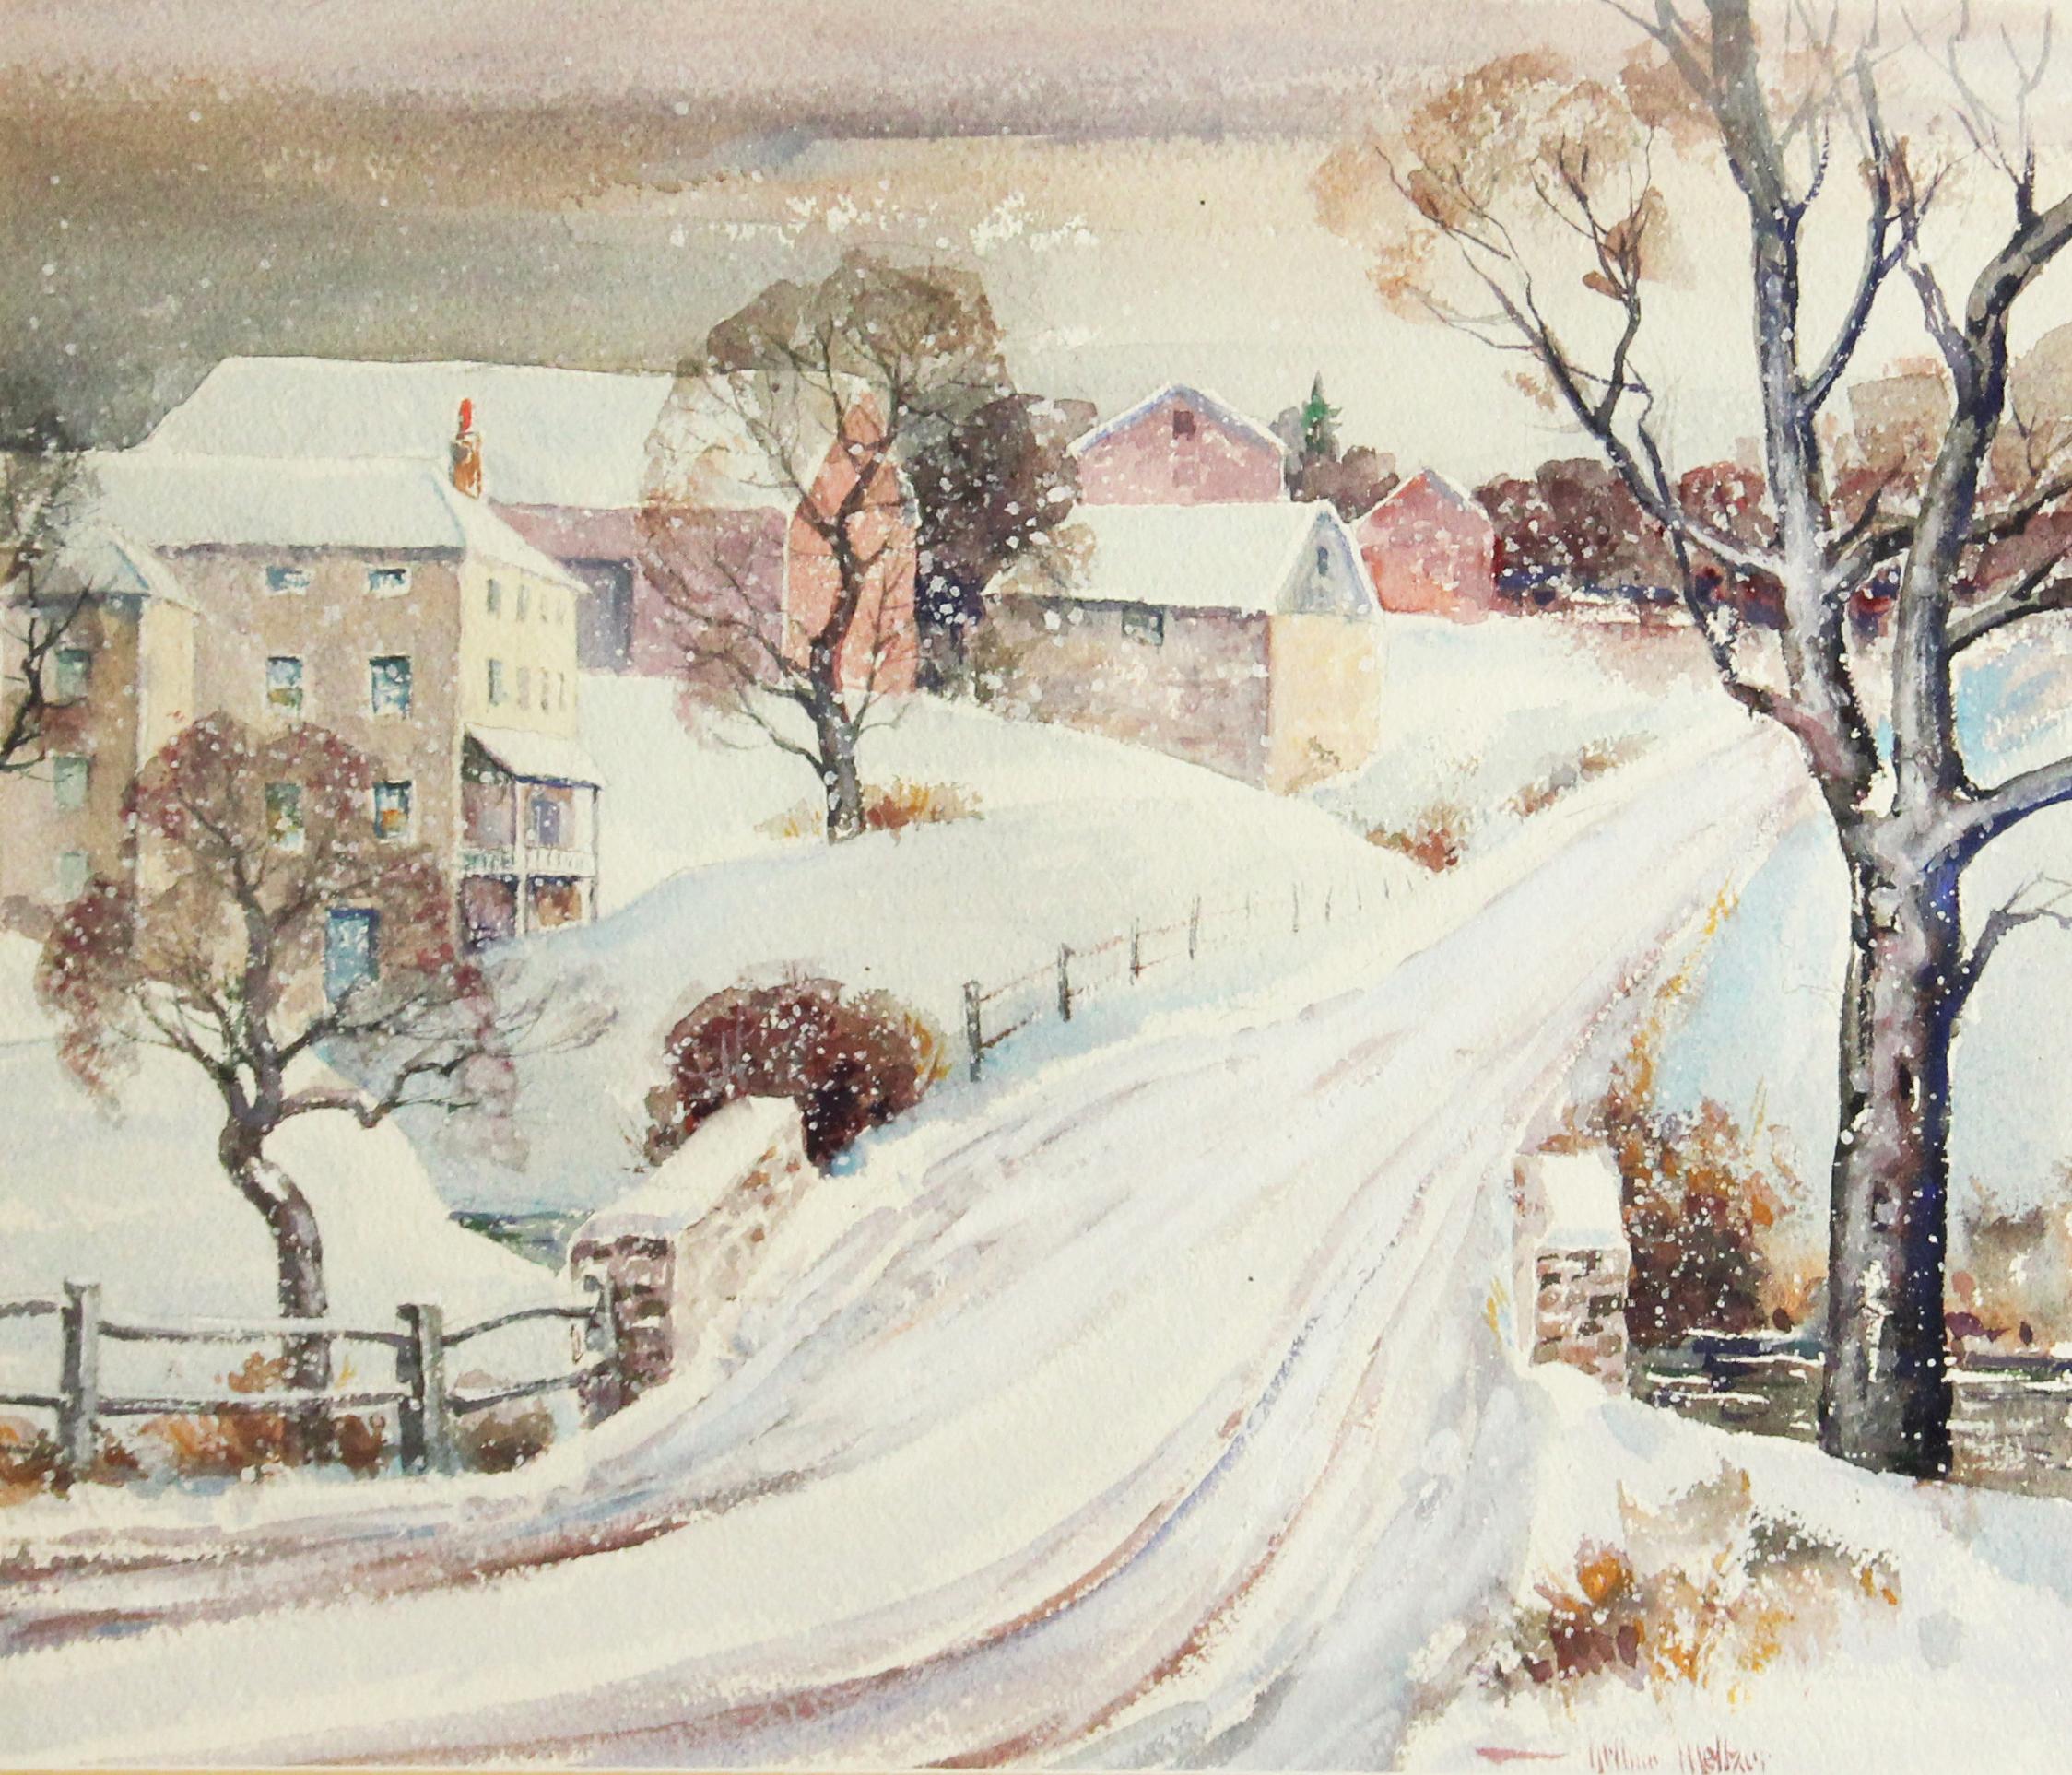 "Winter Street Scene" by Arthur Meltzer is a 11 1/2" x 13 1/2" watercolor on paper landscape painting. It is signed "Arthur Meltzer" in the lower right, and it comes from a private collection in Ohio, USA. 
In 1919 Arthur Meltzer (1893 - 1989),